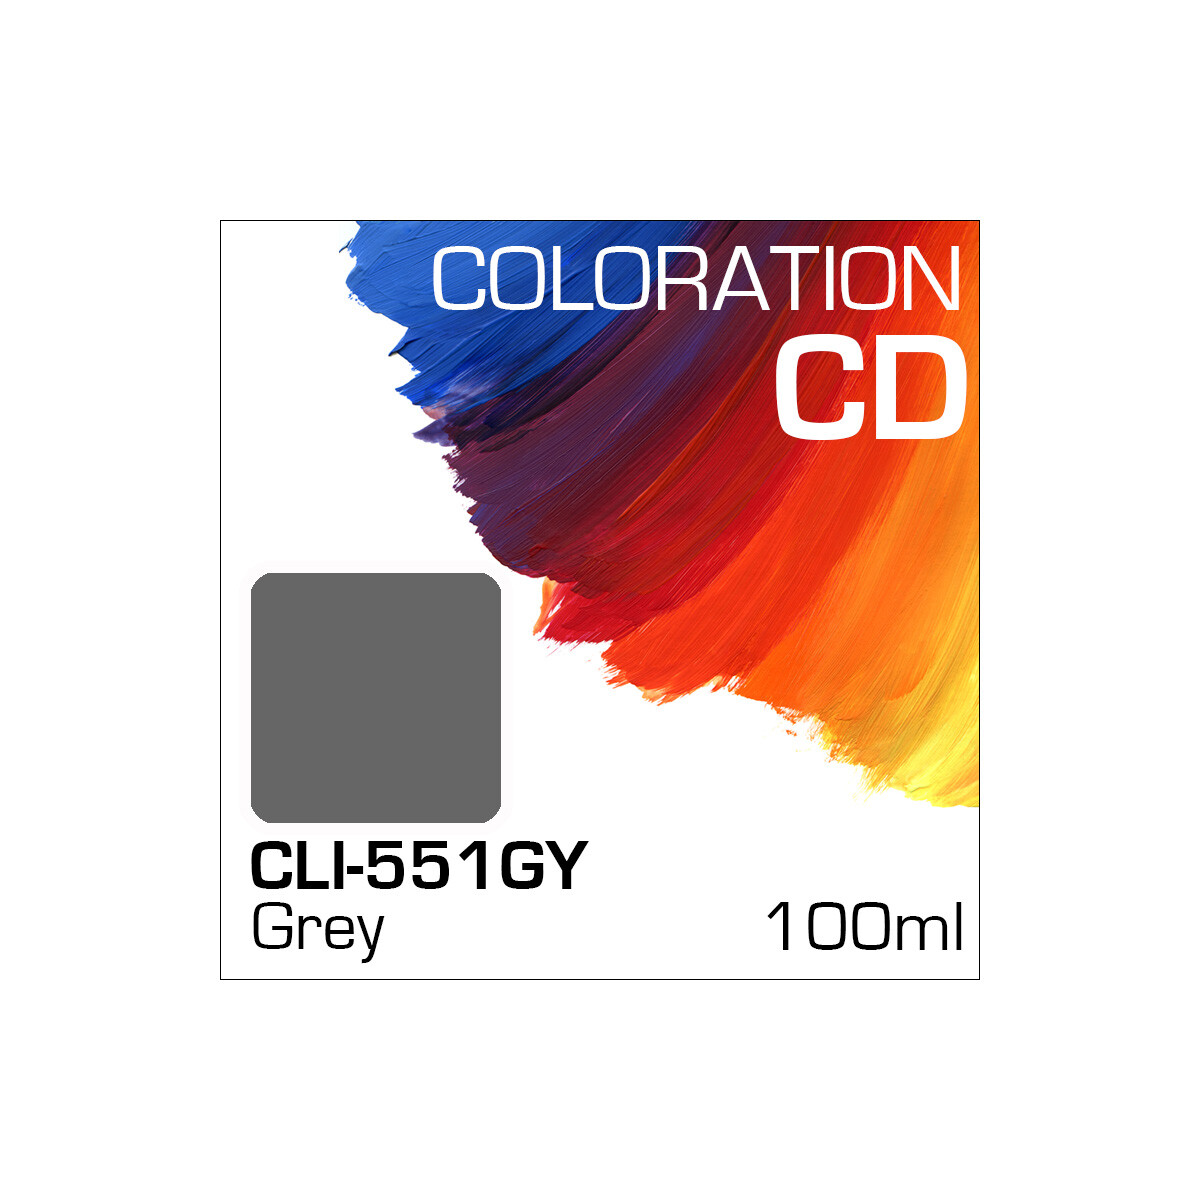 Coloration CD Flasche 100ml CLI-551GY Gray